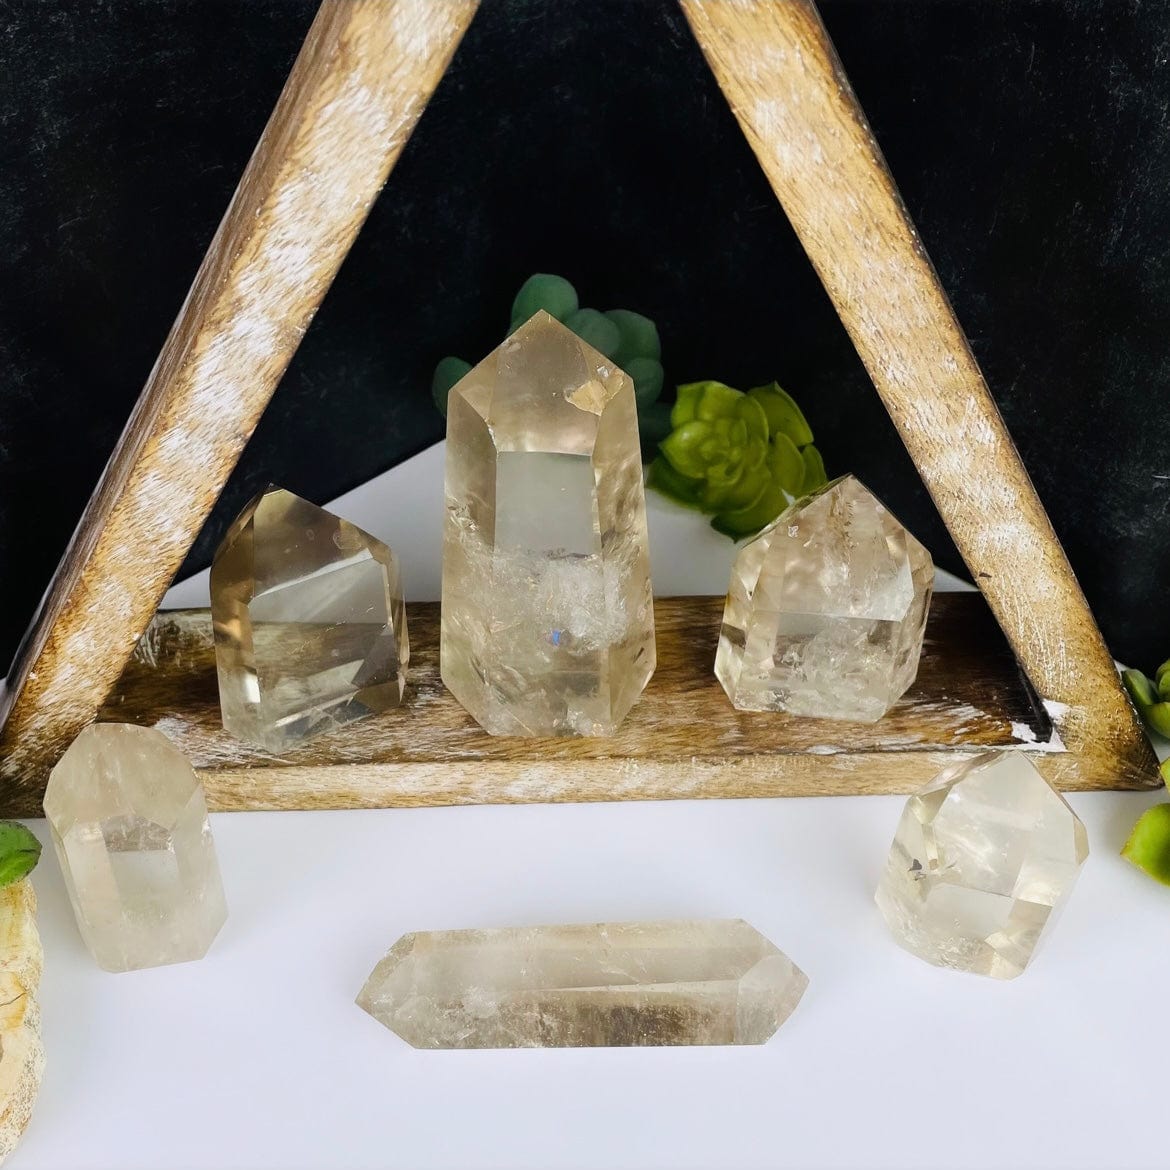 All 6 Smoky Quartz Points with Inclusions - You Choose